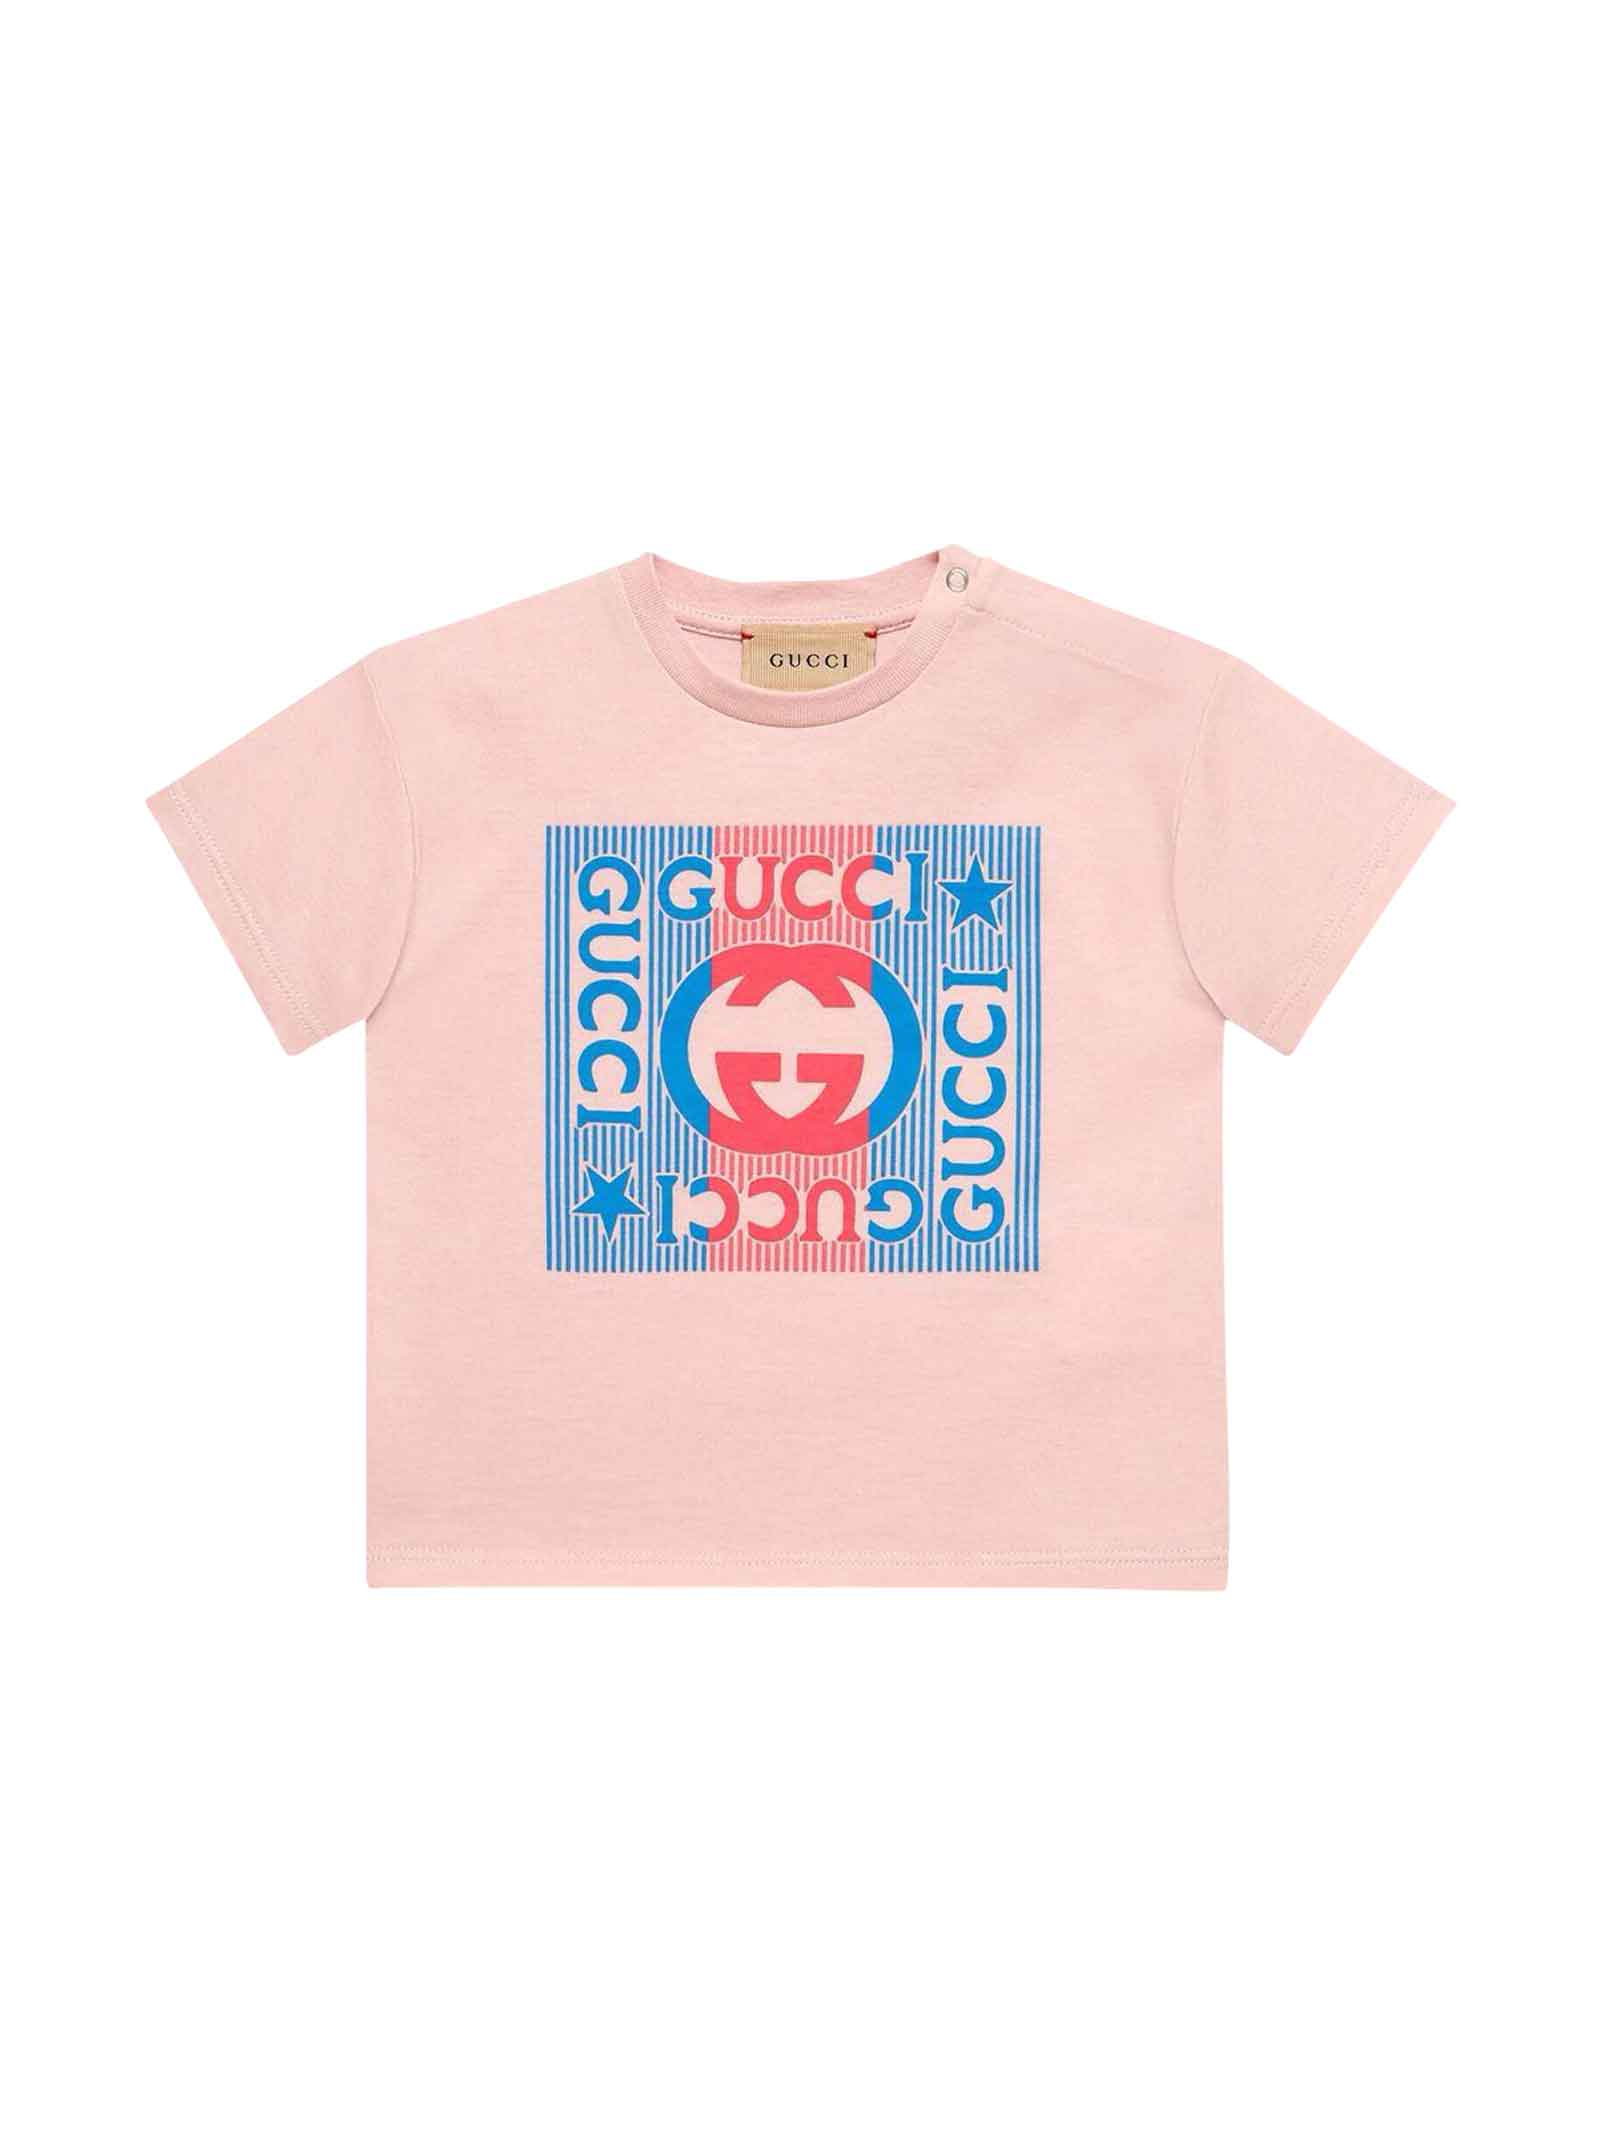 Gucci Pink T-shirt With Print